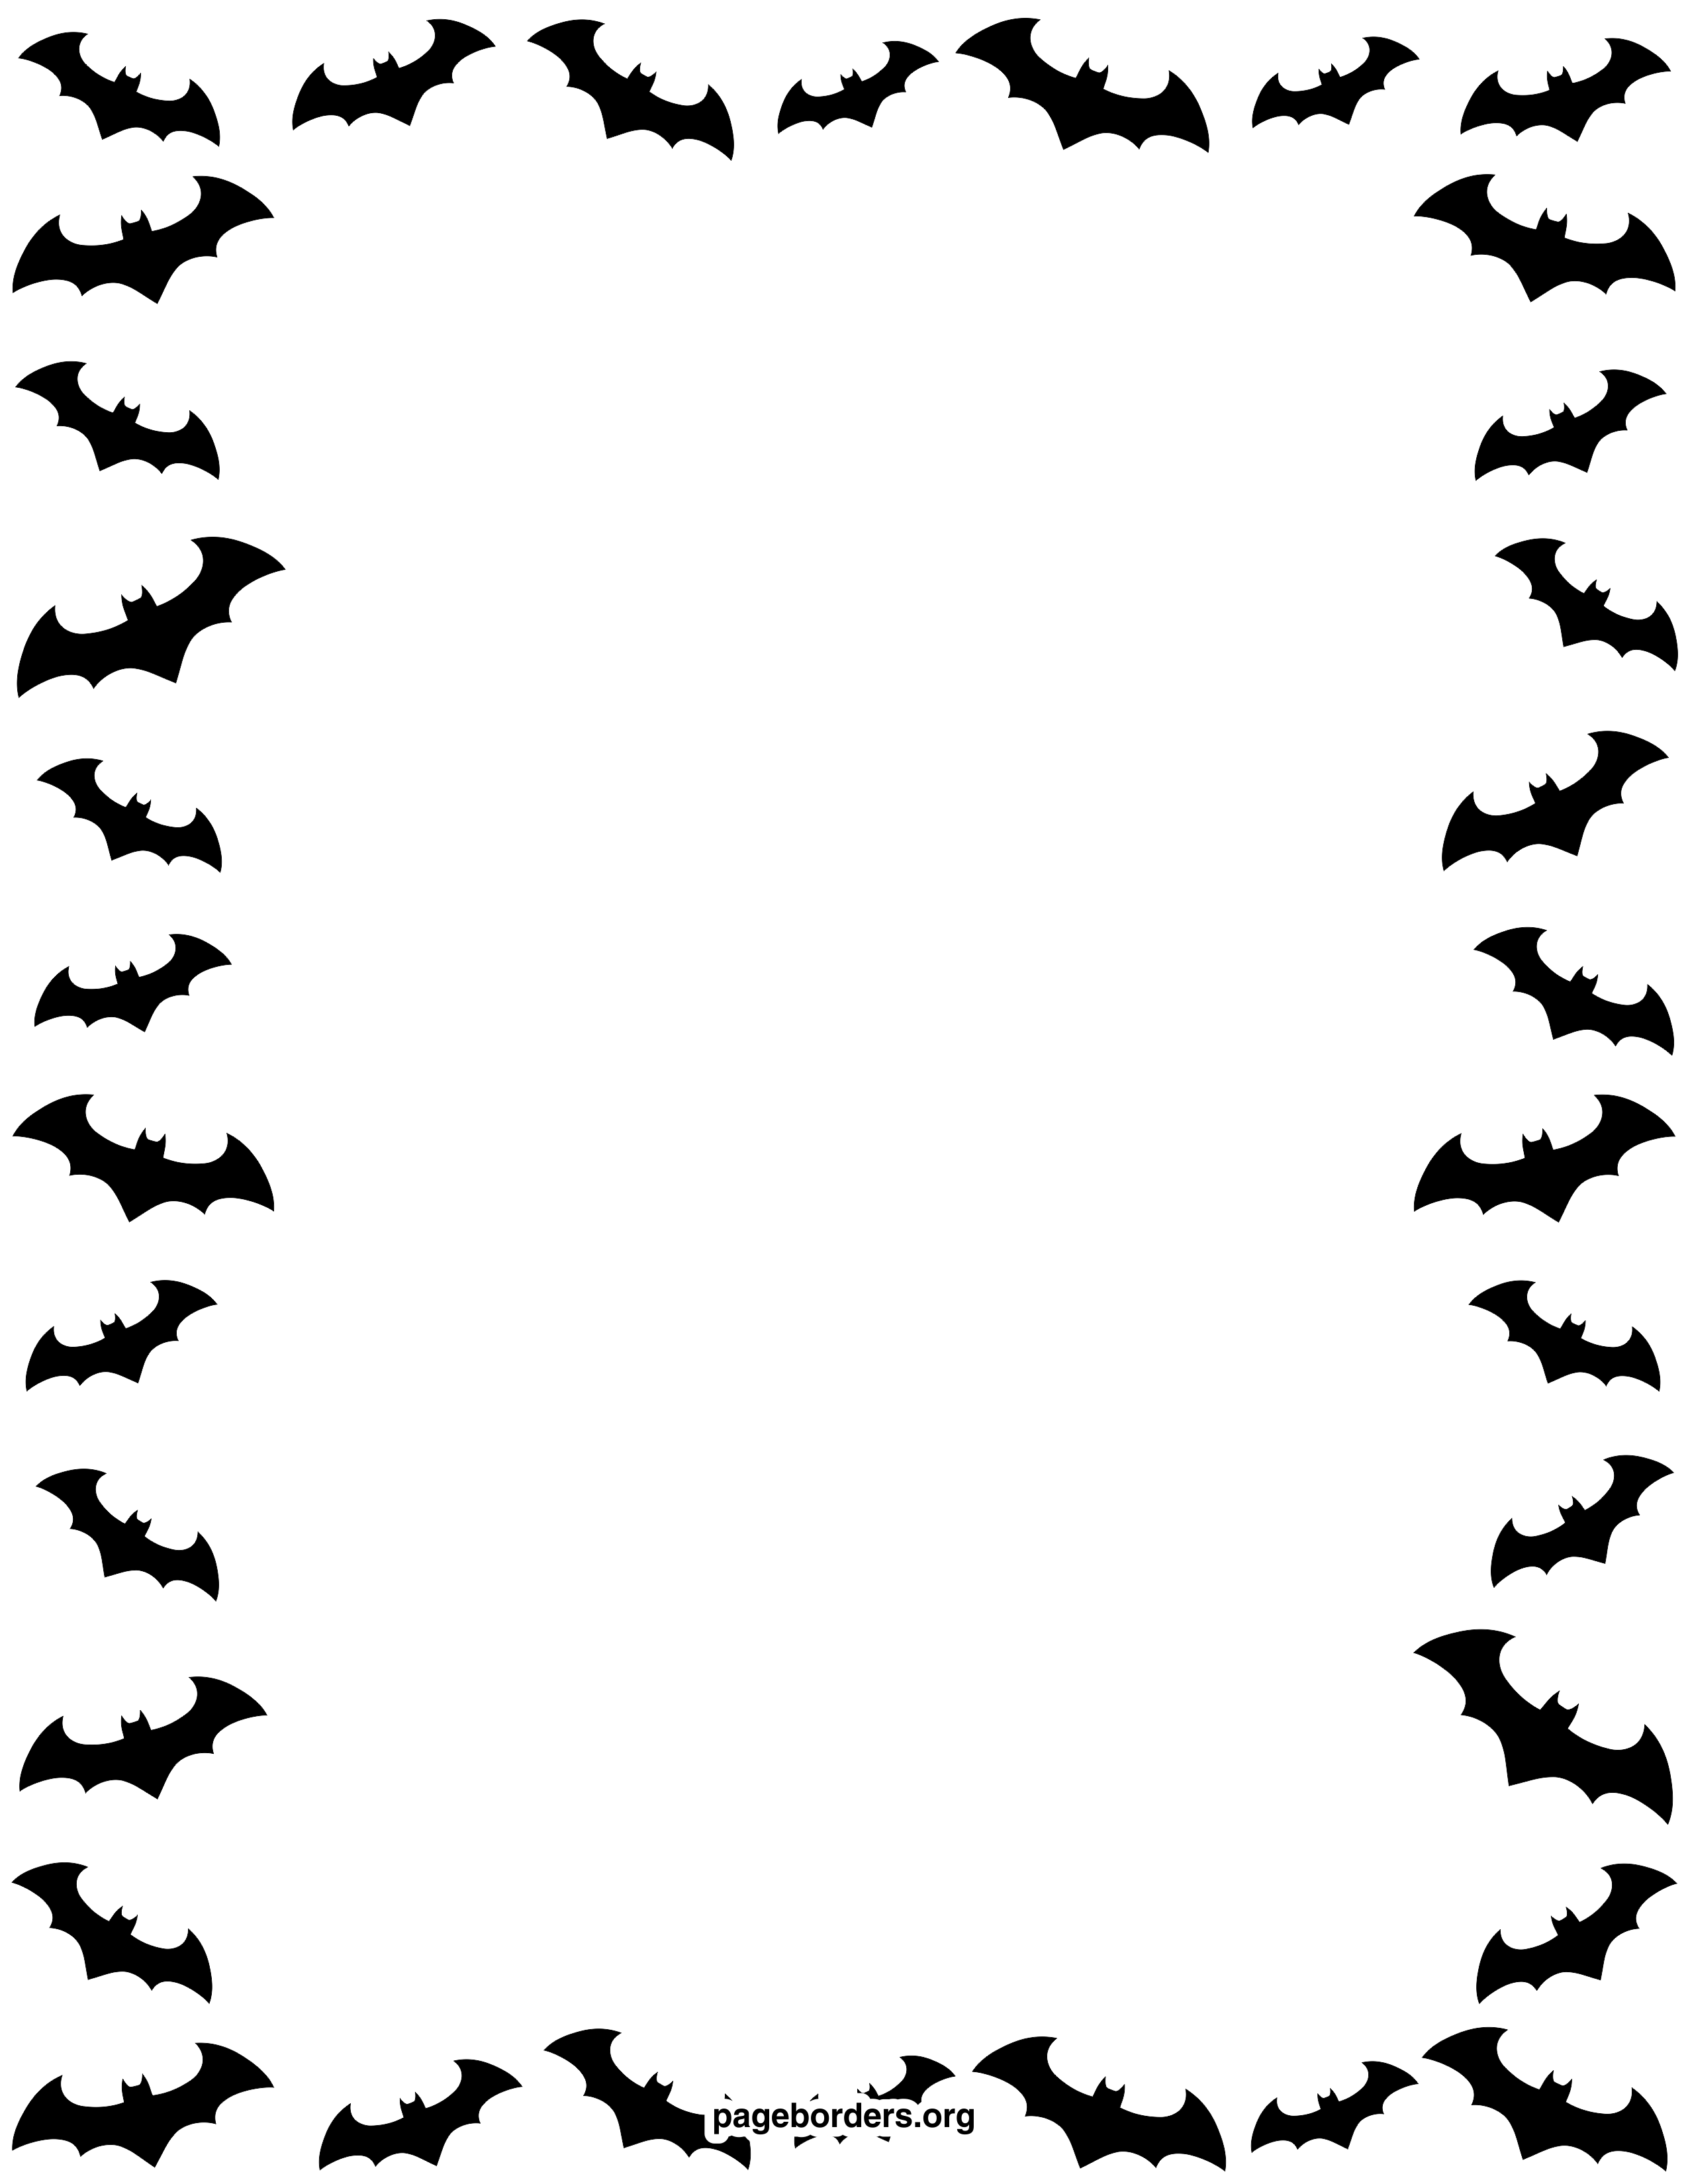 a-word-document-border-for-halloween-clipart-image-41171